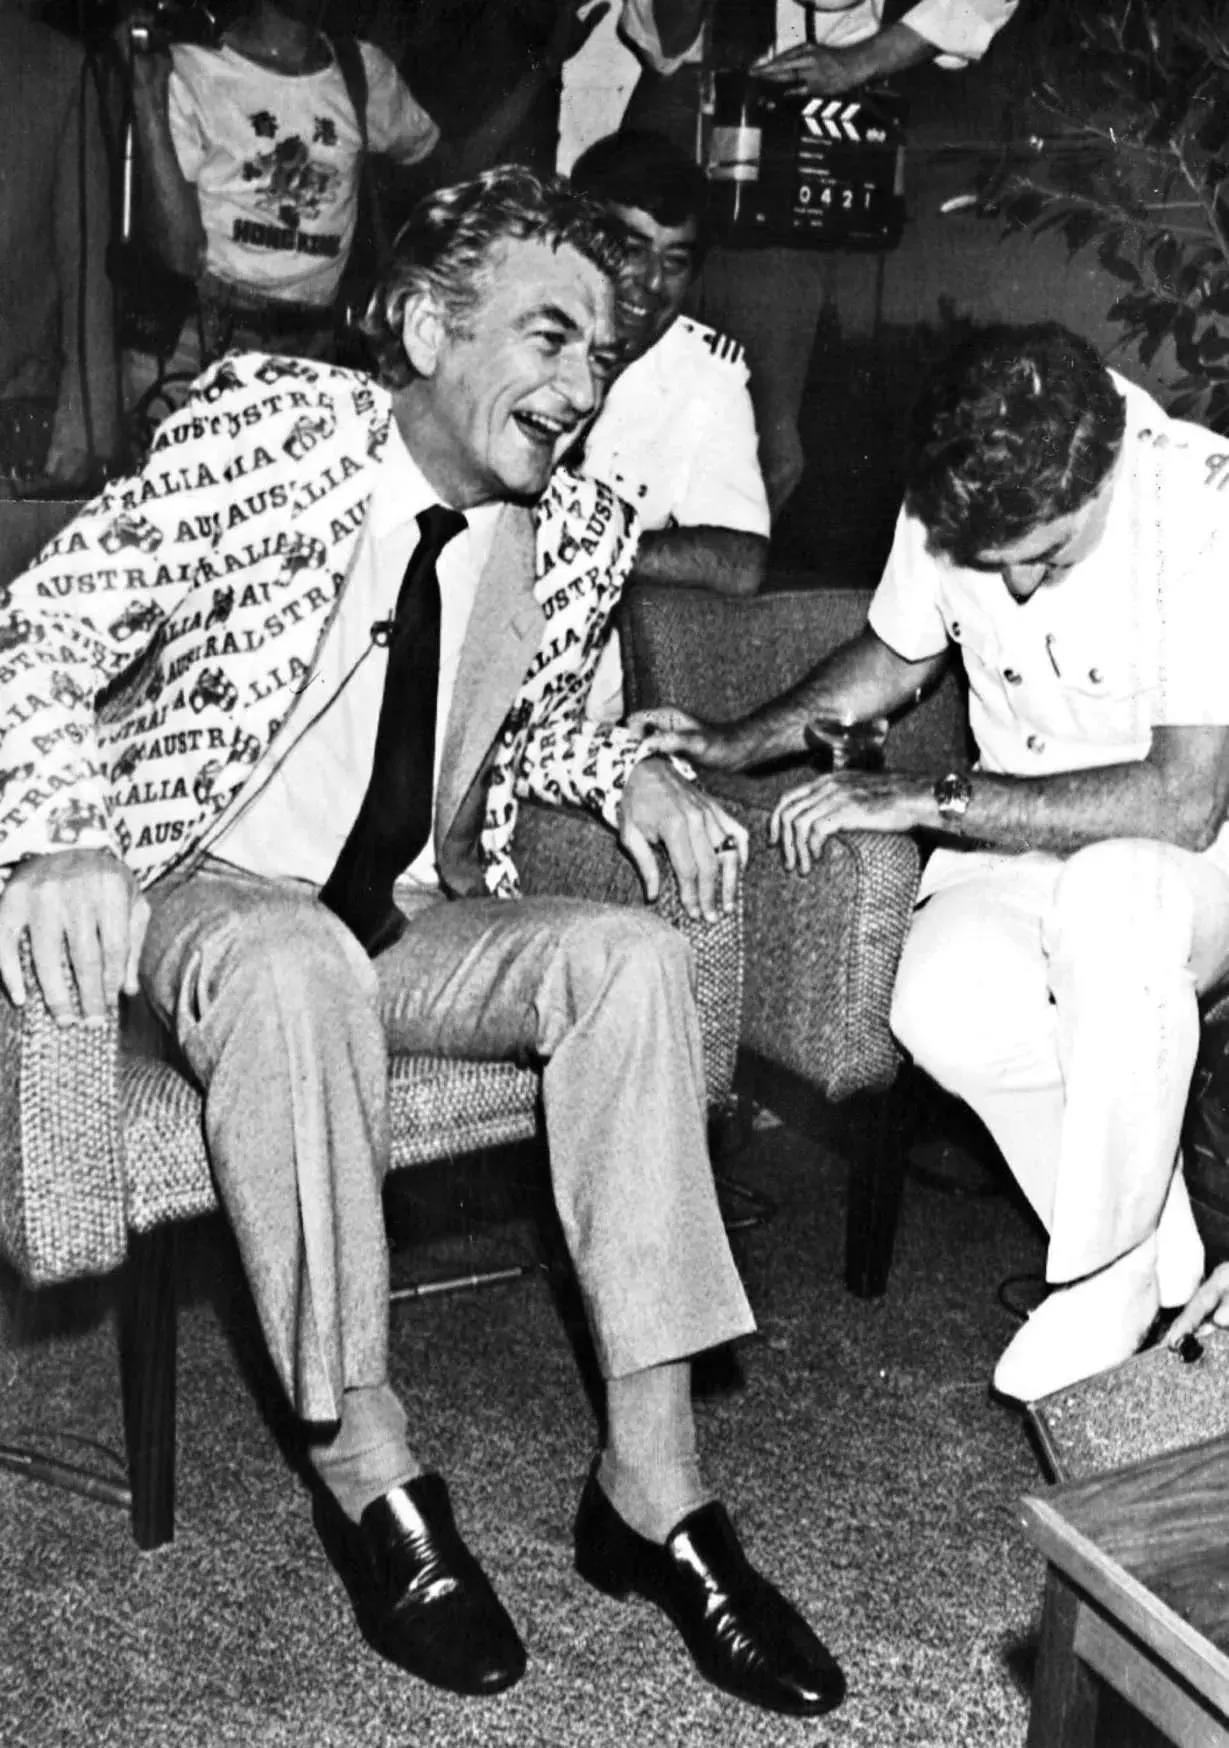 Bob Hawke sits in an armchair laughing with three men in uniform. He is wearing a suit jacket covered in the words 'Australia'. 